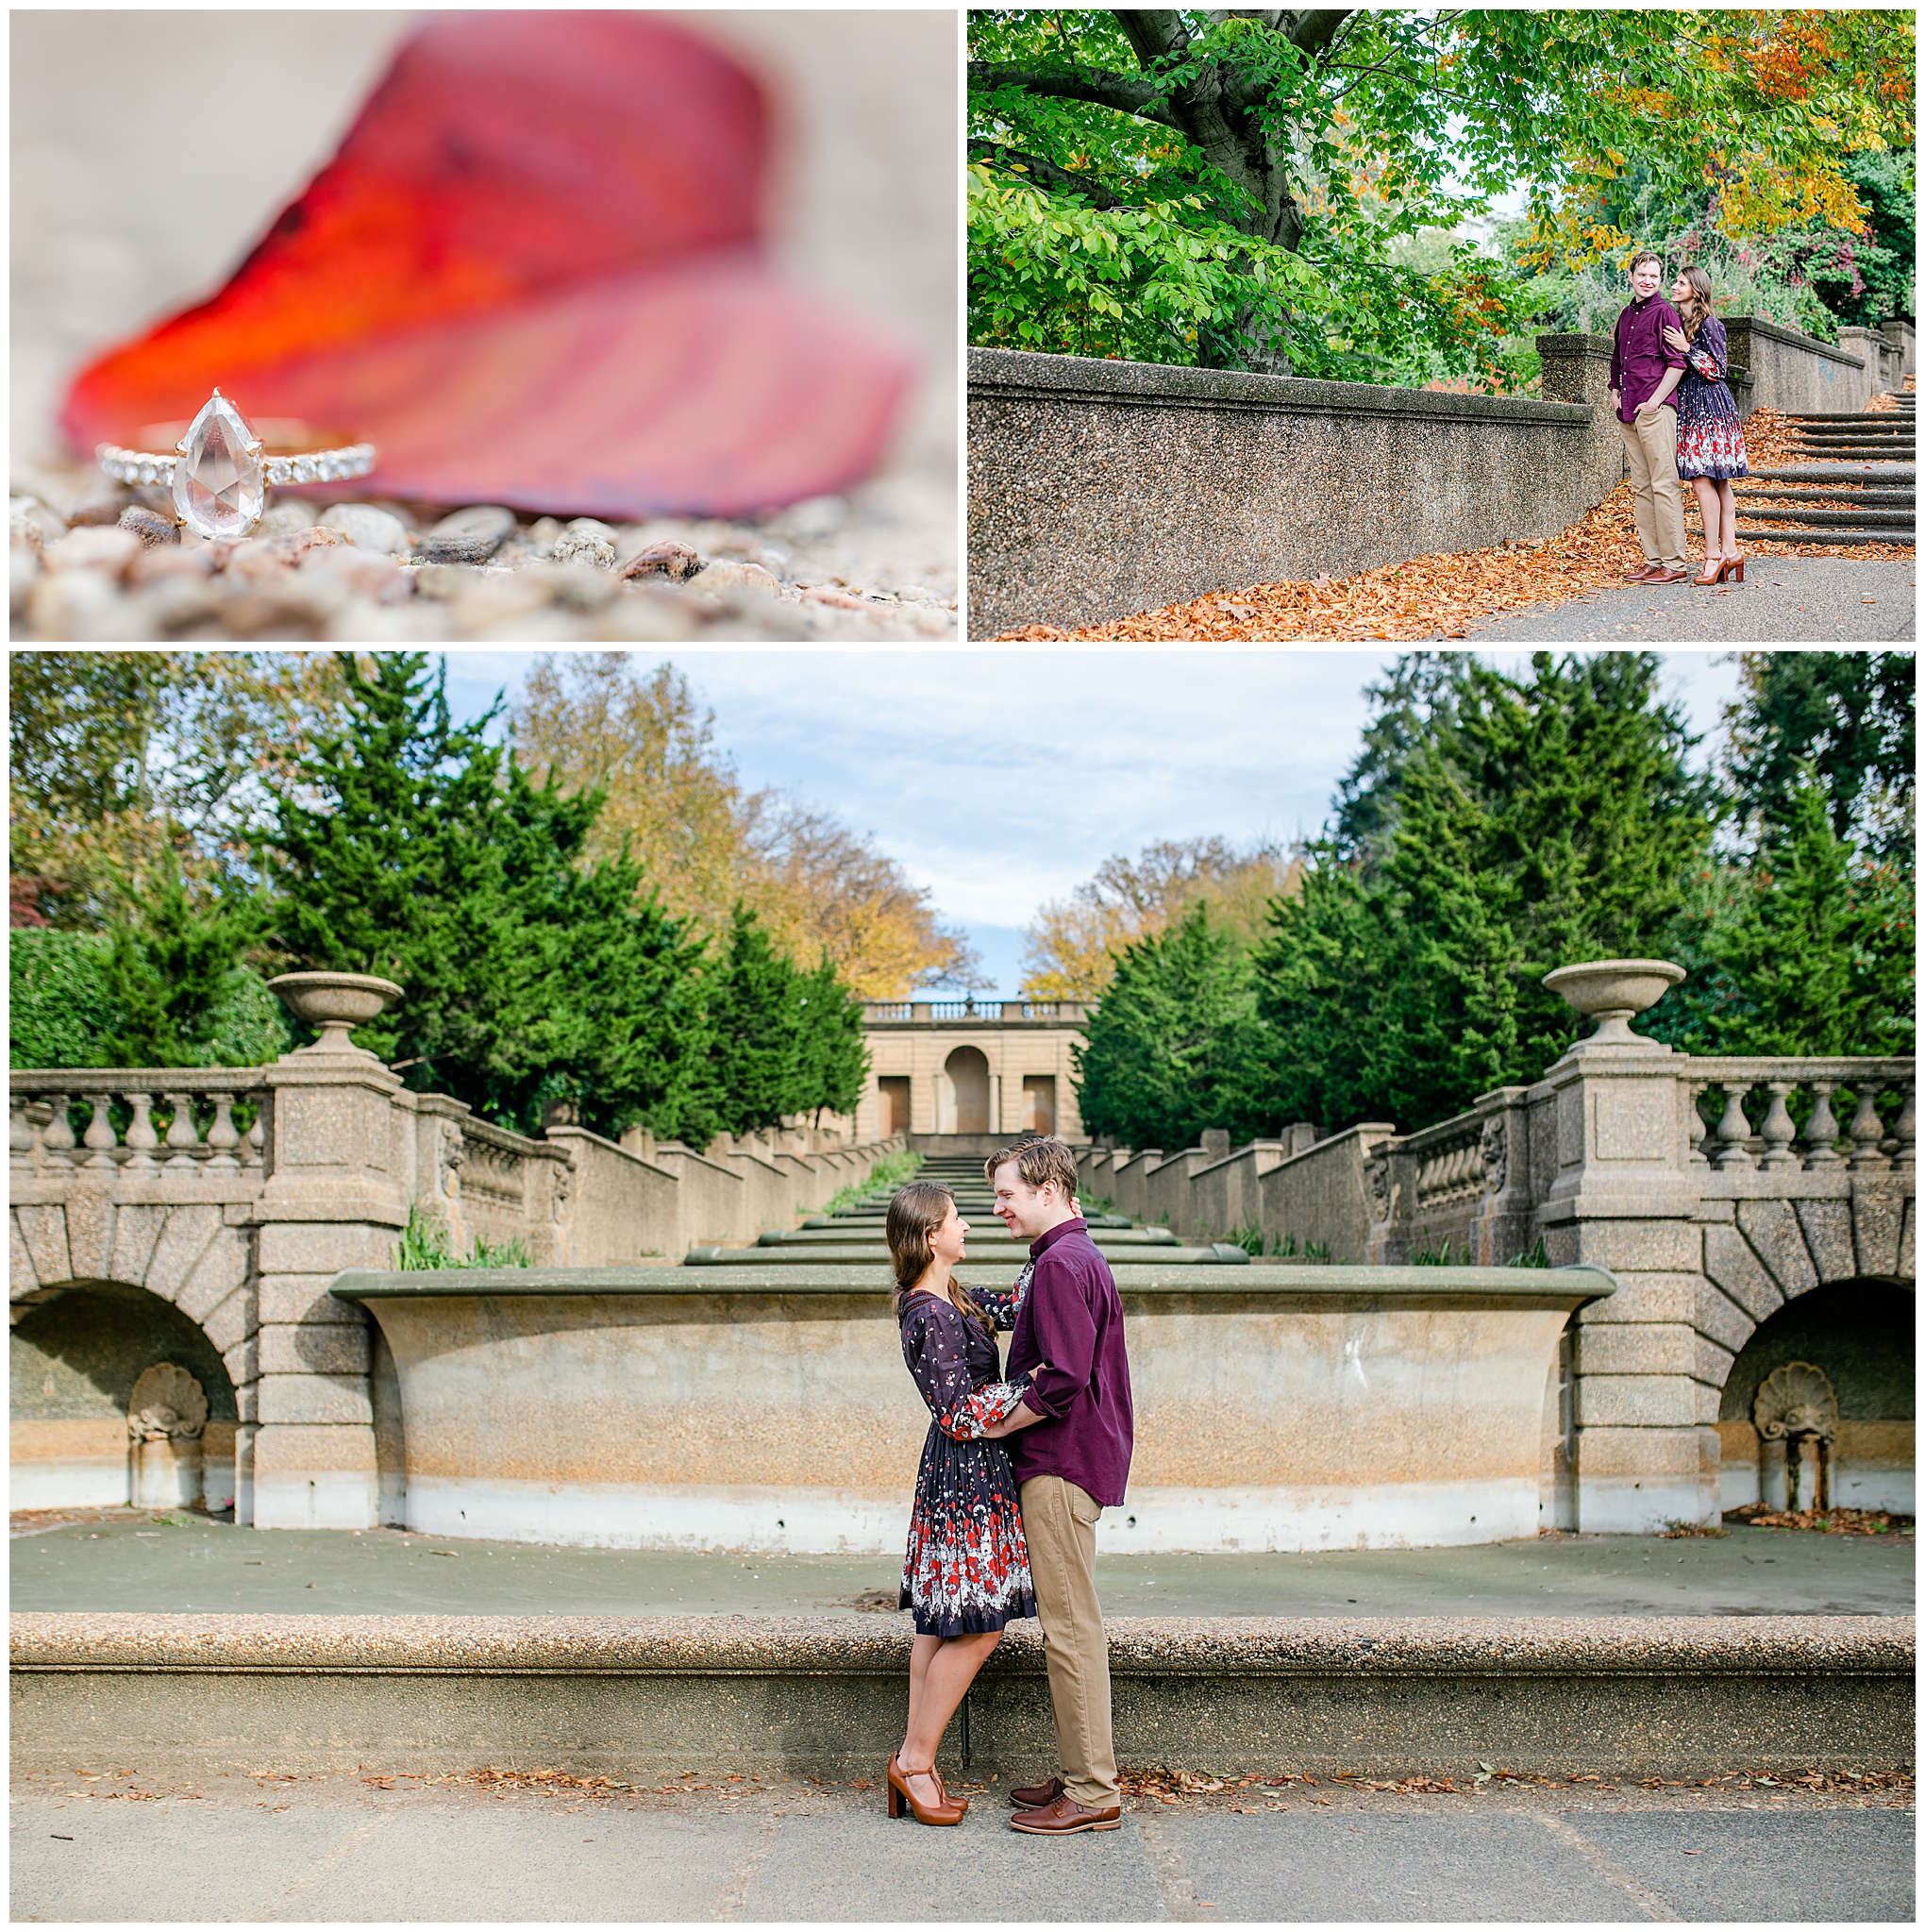 Meridian Hill Park engagement photos, DC engagement photos, DC engagement photographer, DC wedding photographer, Capitol Hill engagement photos, Capitol Hill photographer, Capitol Hill DC, Washington DC photographer, Rachel E.H. Photography, autumn engagement session, autumn engagement photo outfits, engaged couple, autumn aesthetic, marquis shaped diamond engagement ring, autumn engagement session outfits